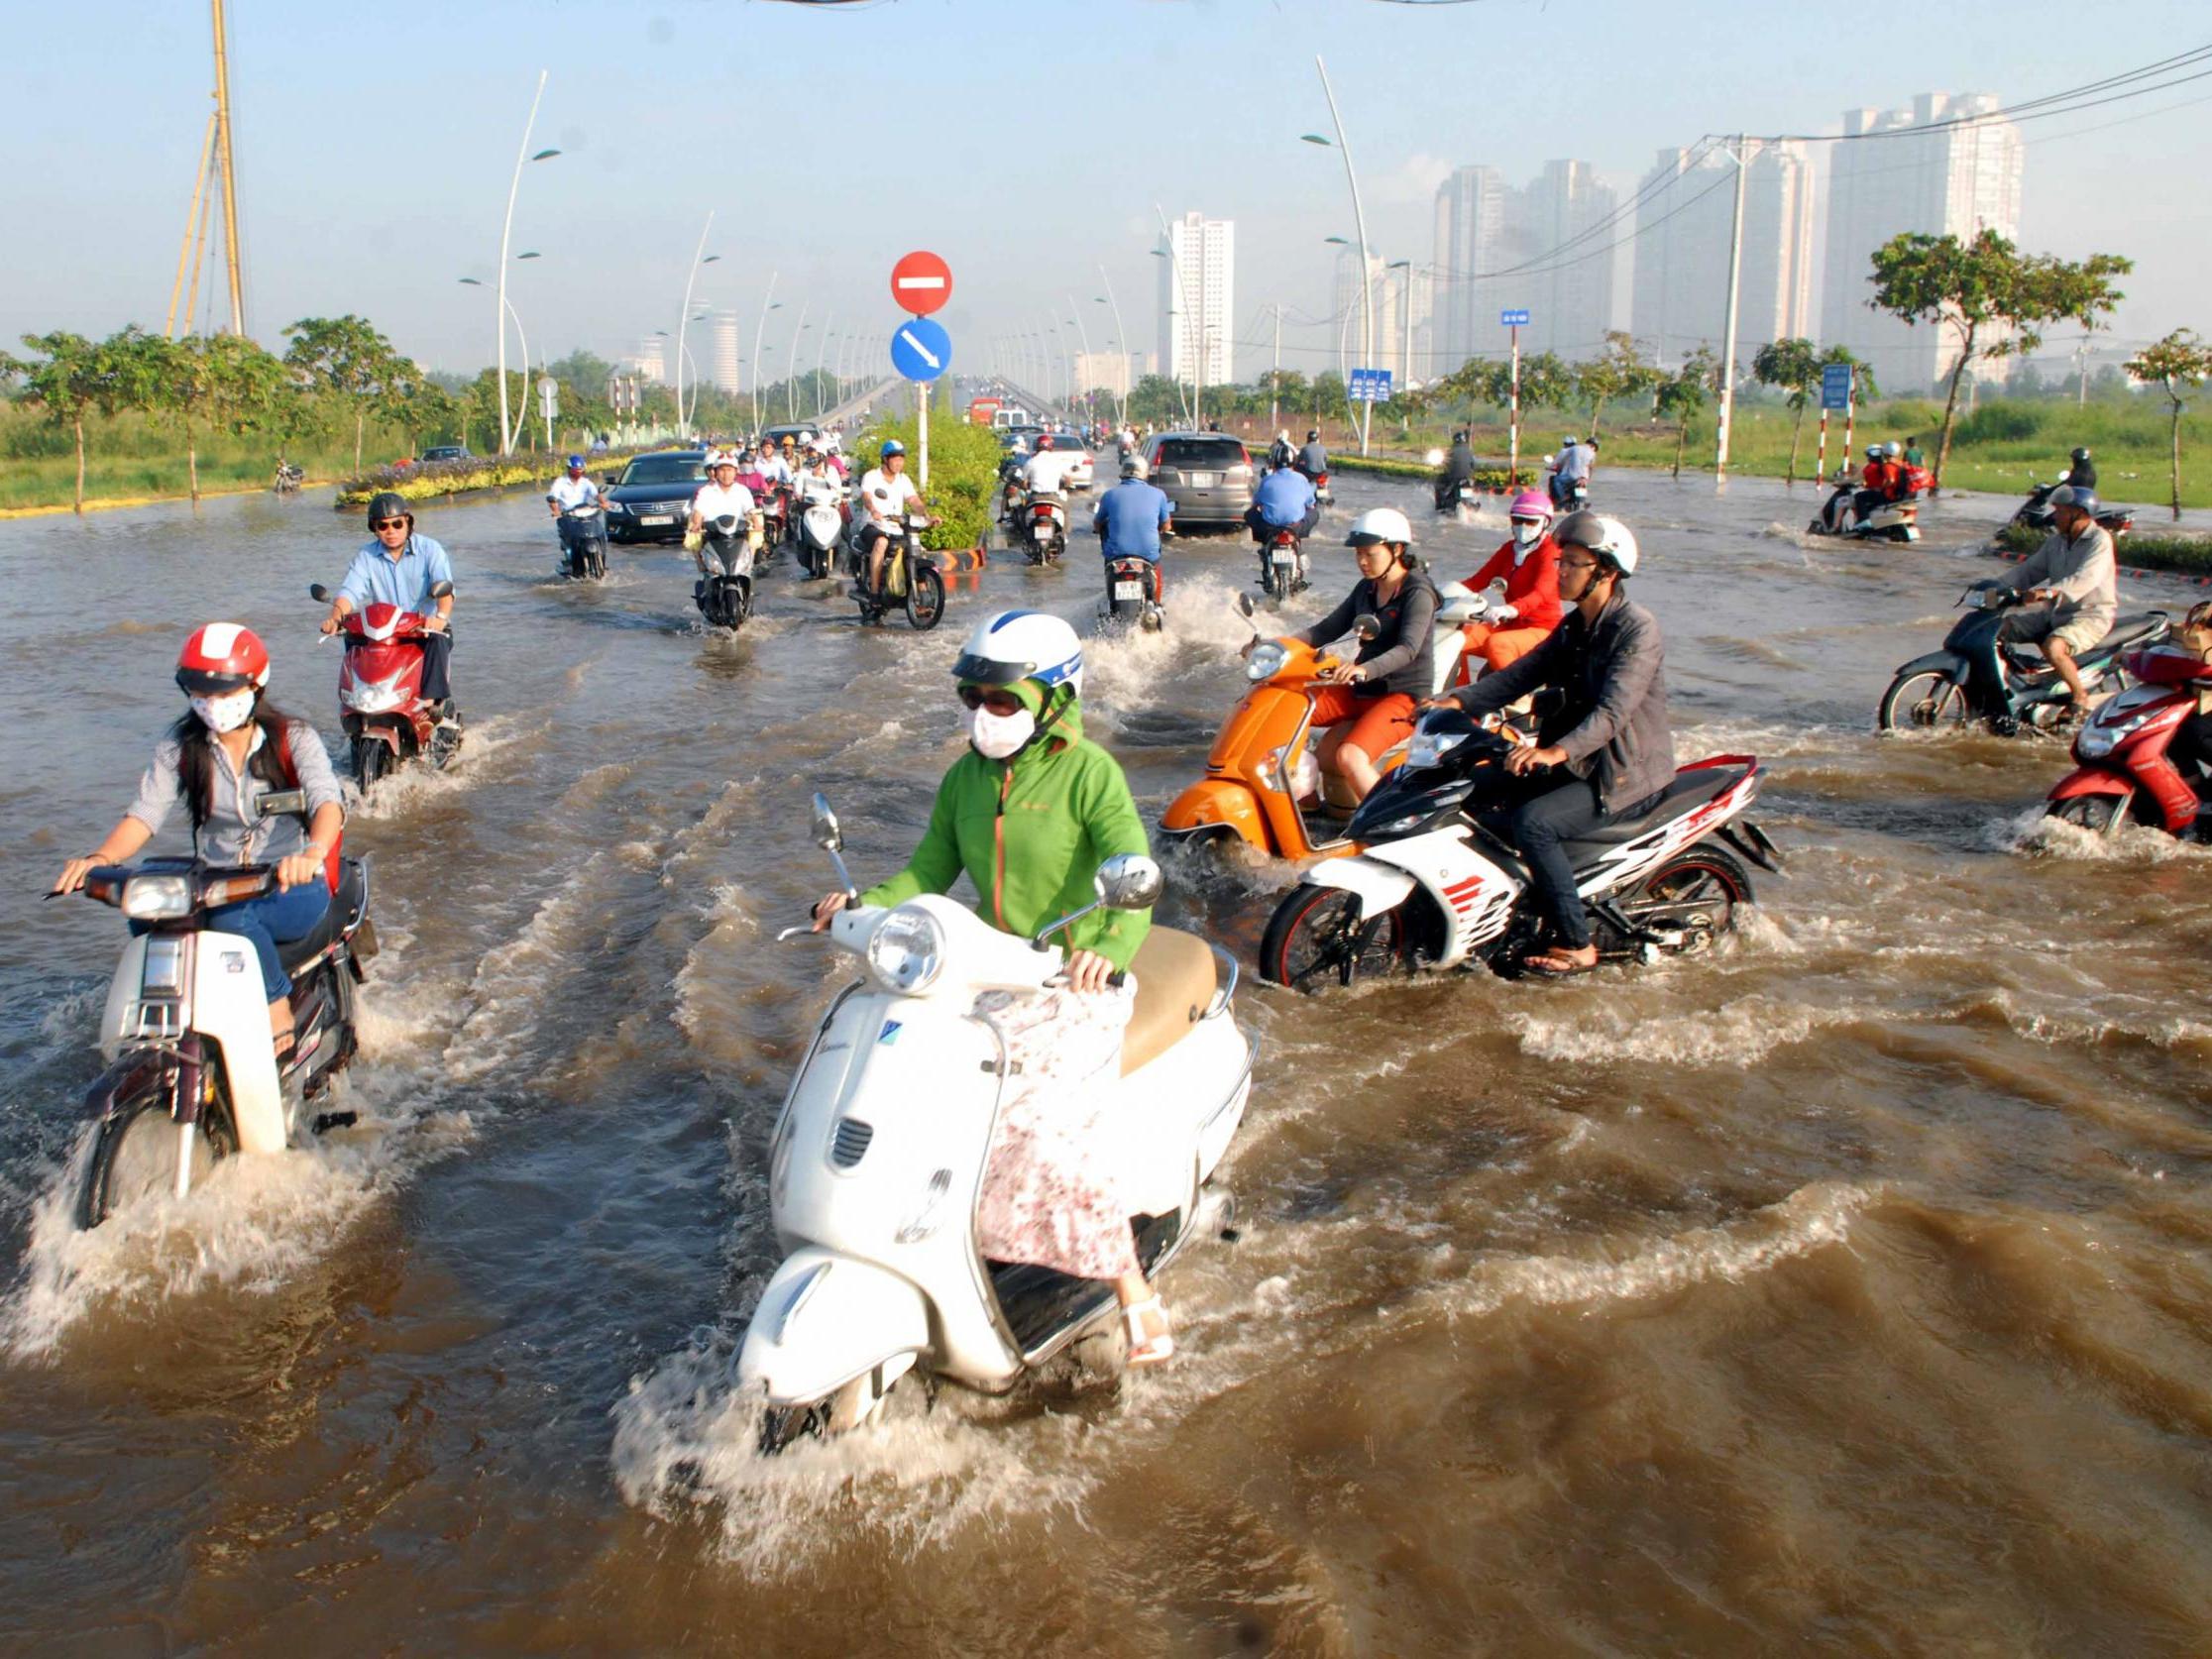 Cars and motorcycles drive on a road getting flooded due to high tide water and rain in Ho Chi Minh City in 2014